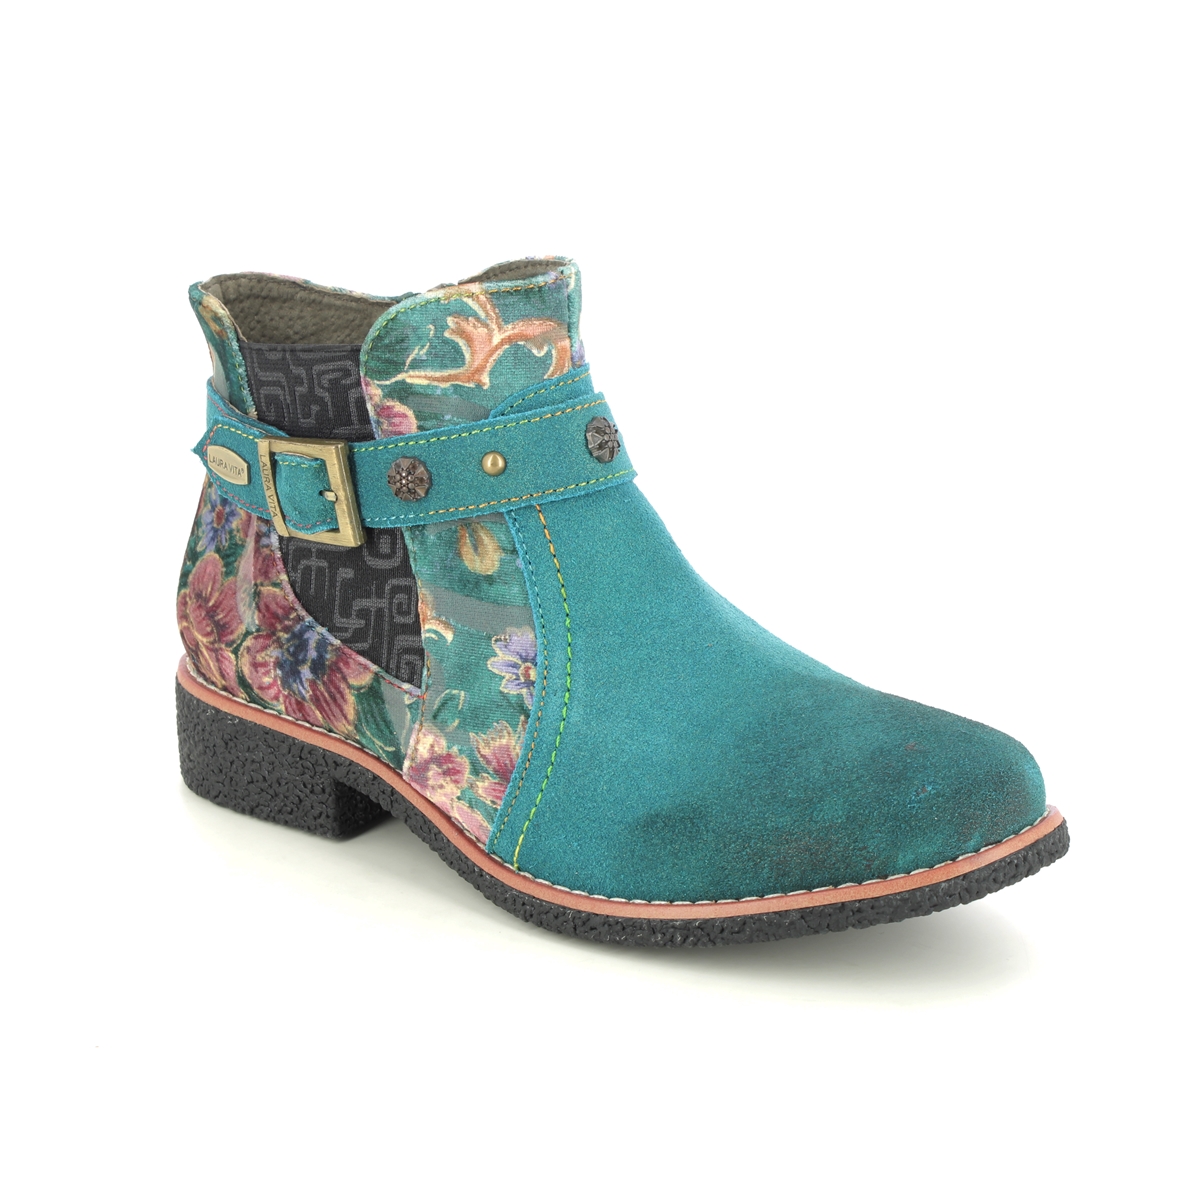 Laura Vita - Cocralieo 04 (Turquoise Leather) 4195-94 In Size 39 In Floral Turquoise Leather